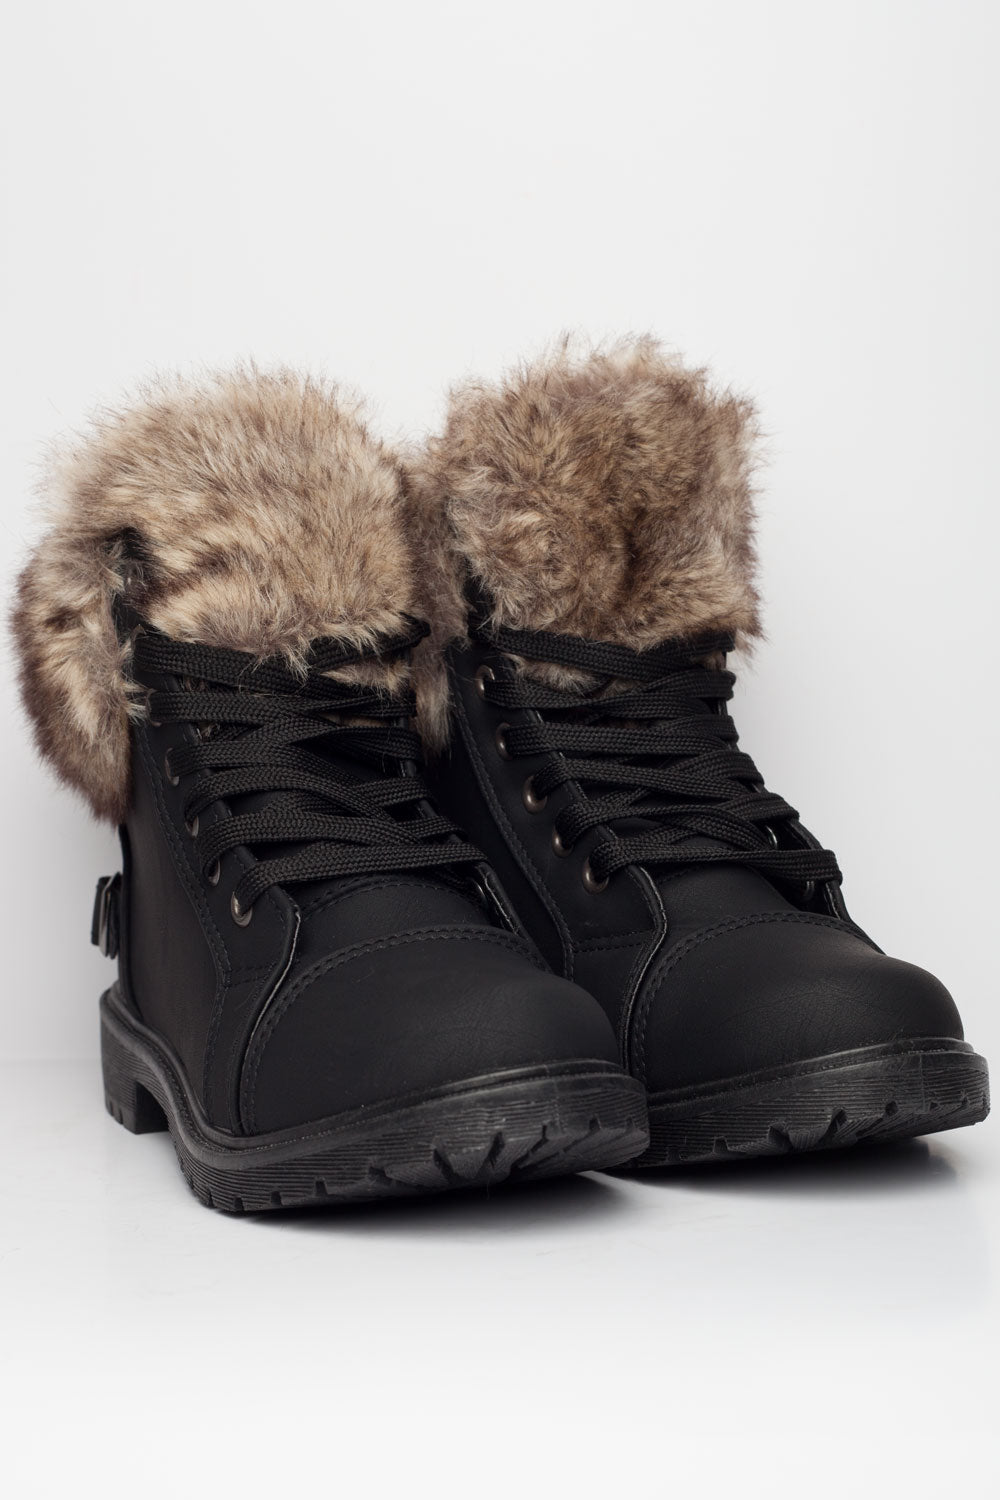 fur lined winter boots uk